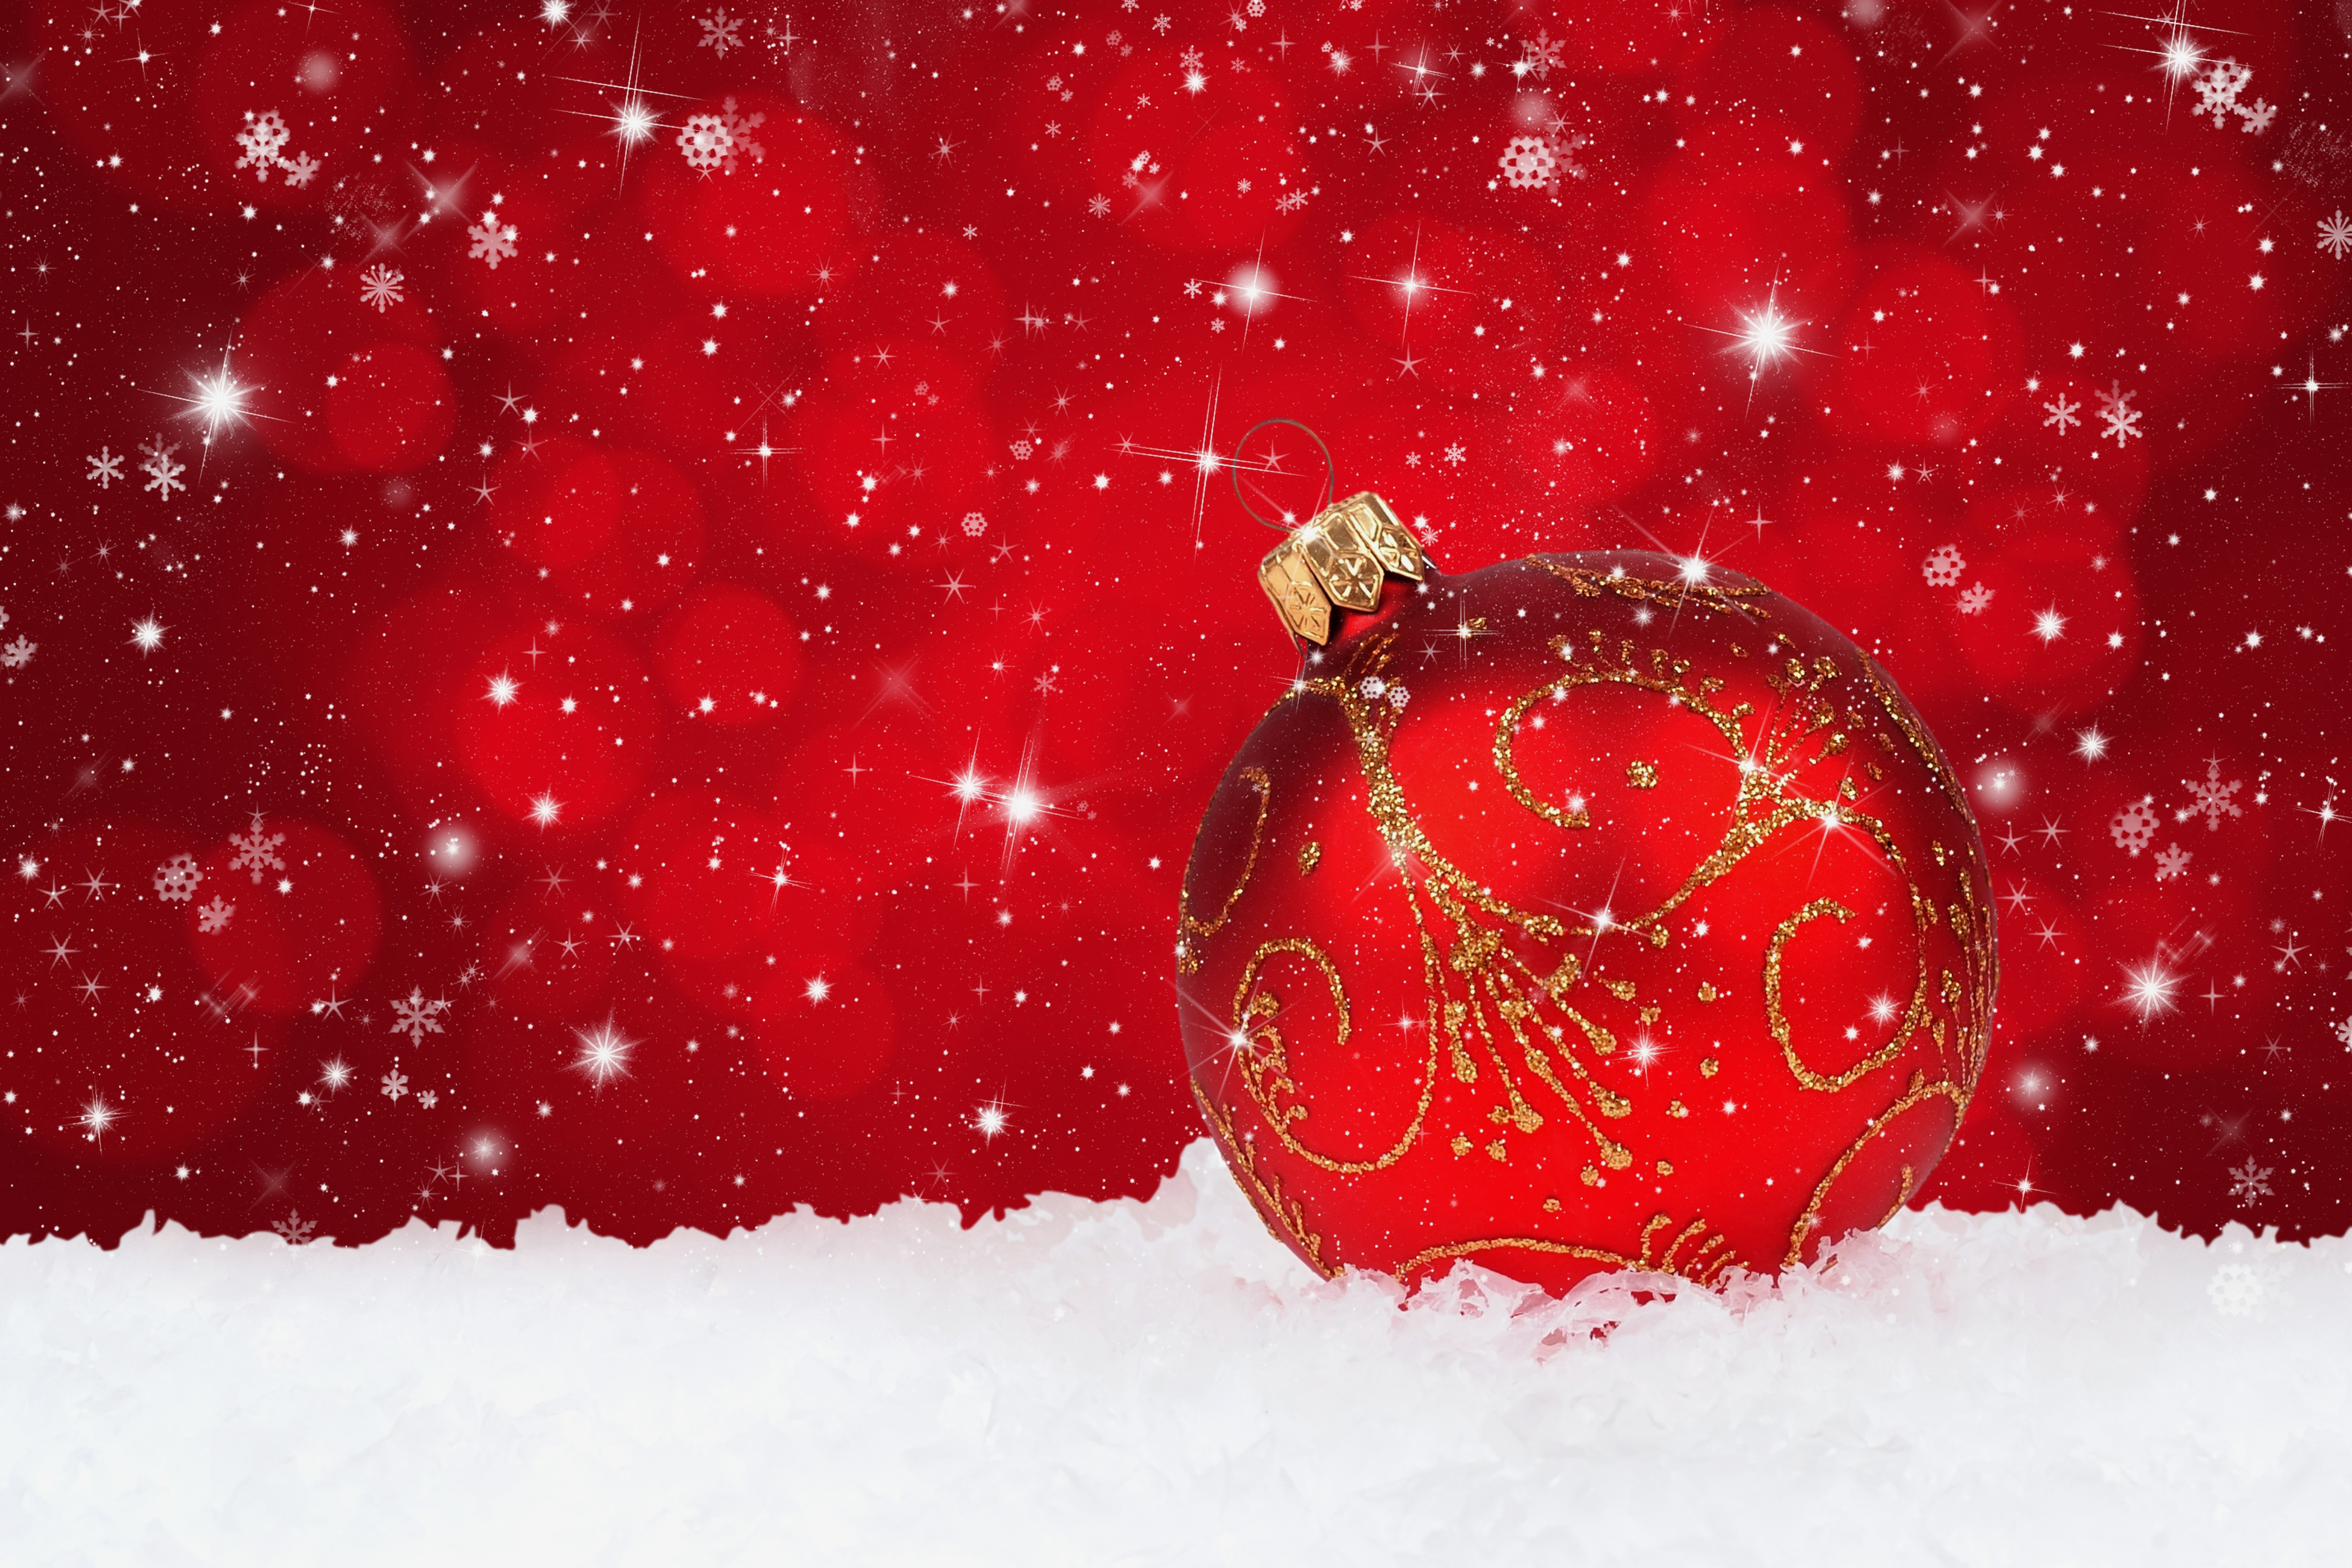 Red Christmas Snowy Background with Christmas Ball | Gallery ...